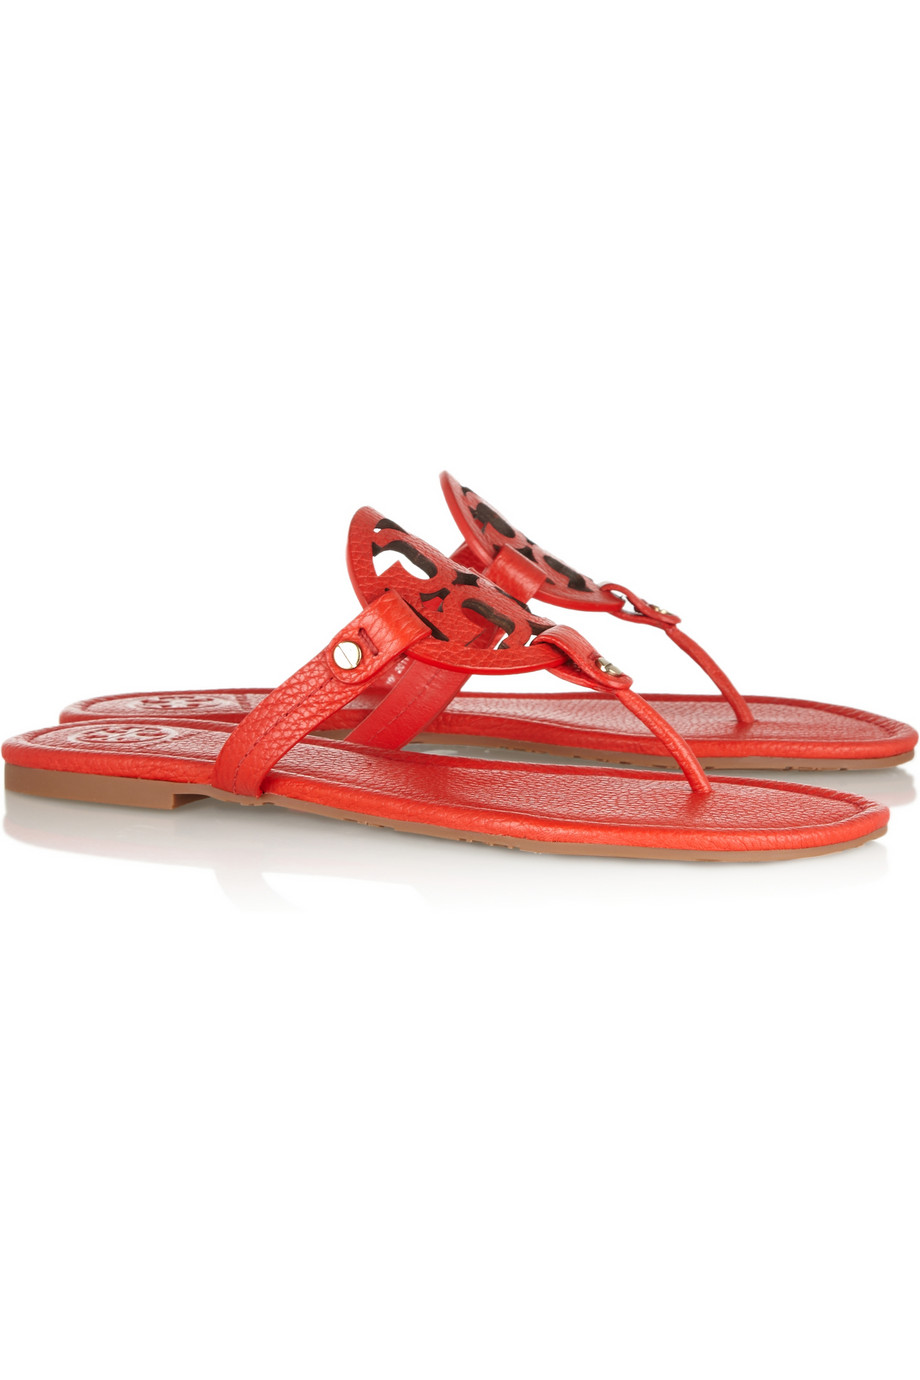 Tory Burch Miller Textured Leather Sandals in Red | Lyst